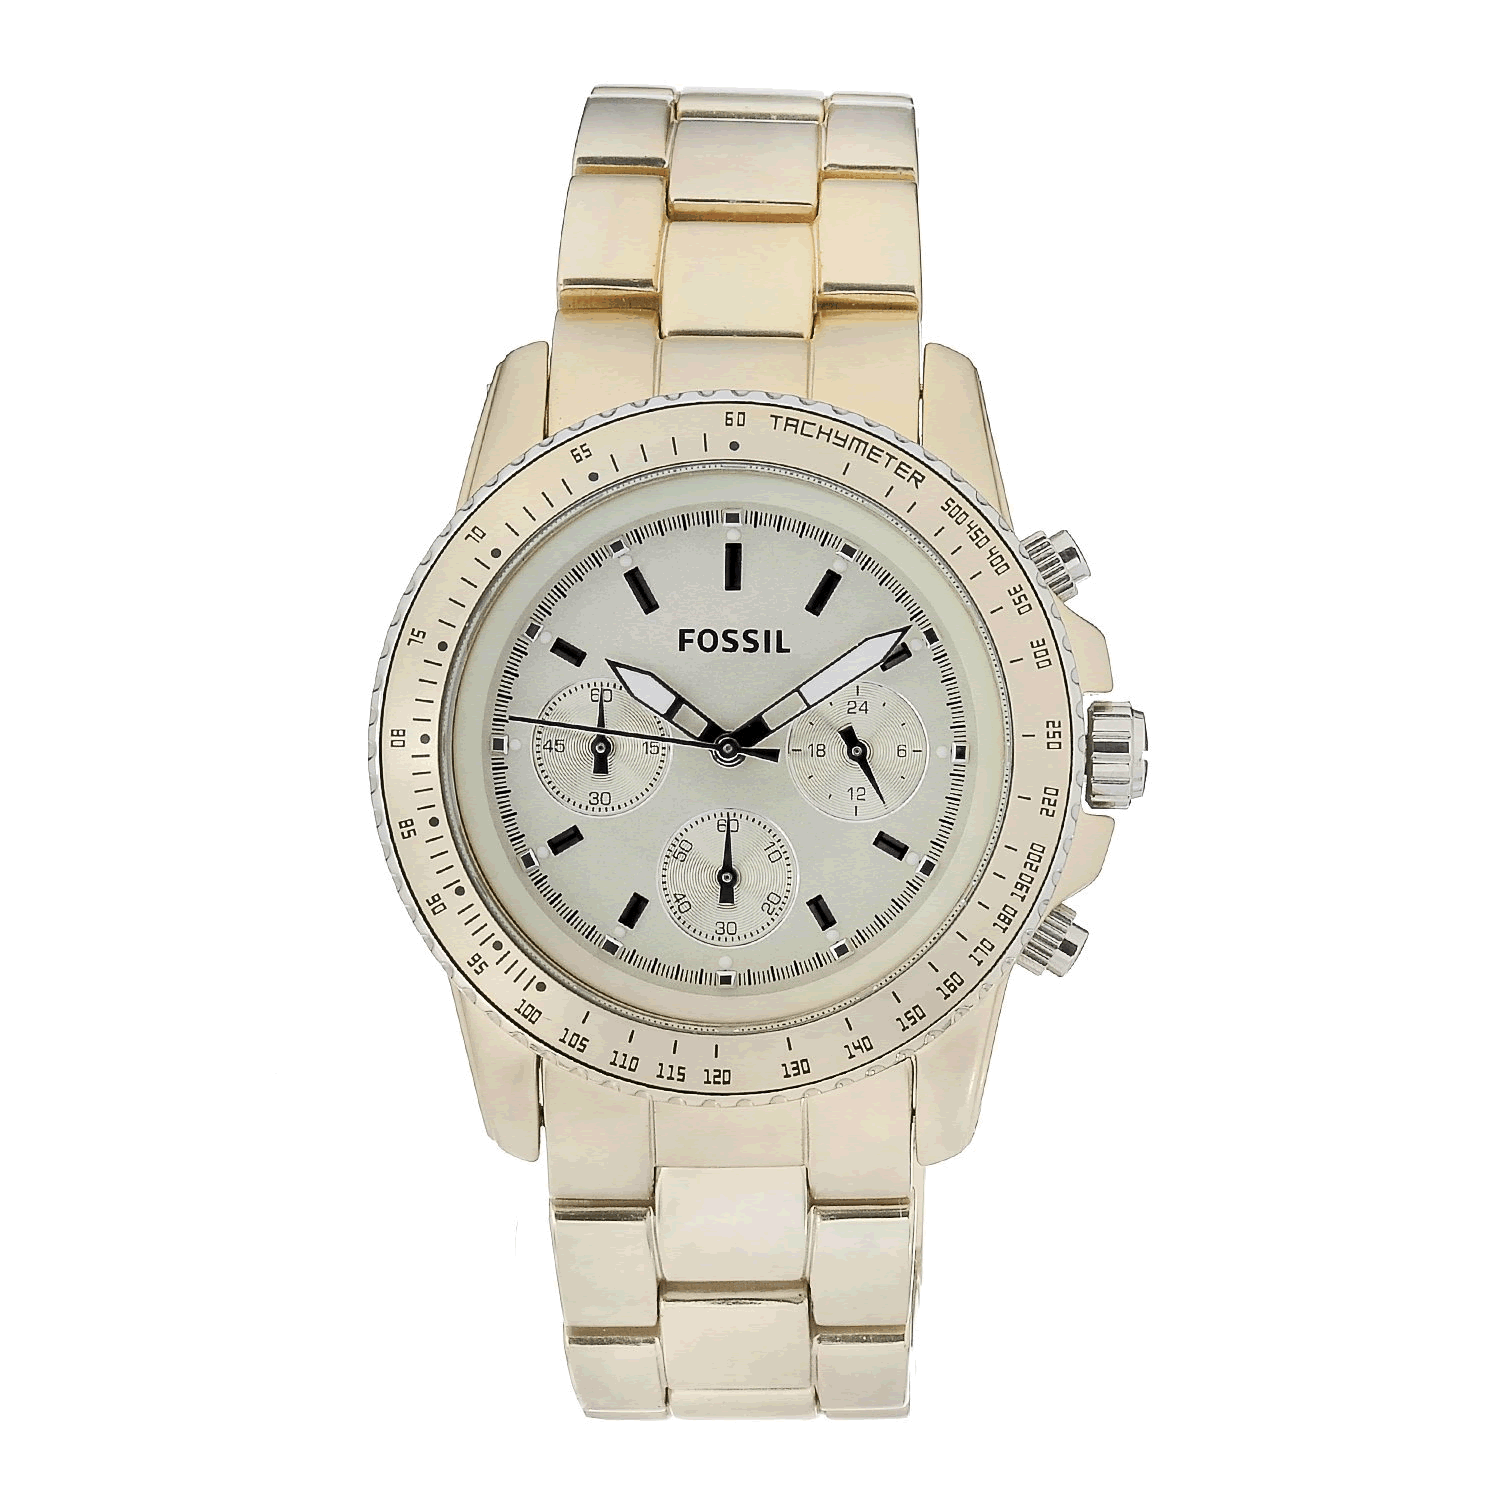 Fossil Fossil Ladies Champagne Stella Aluminum Chronograph Watch